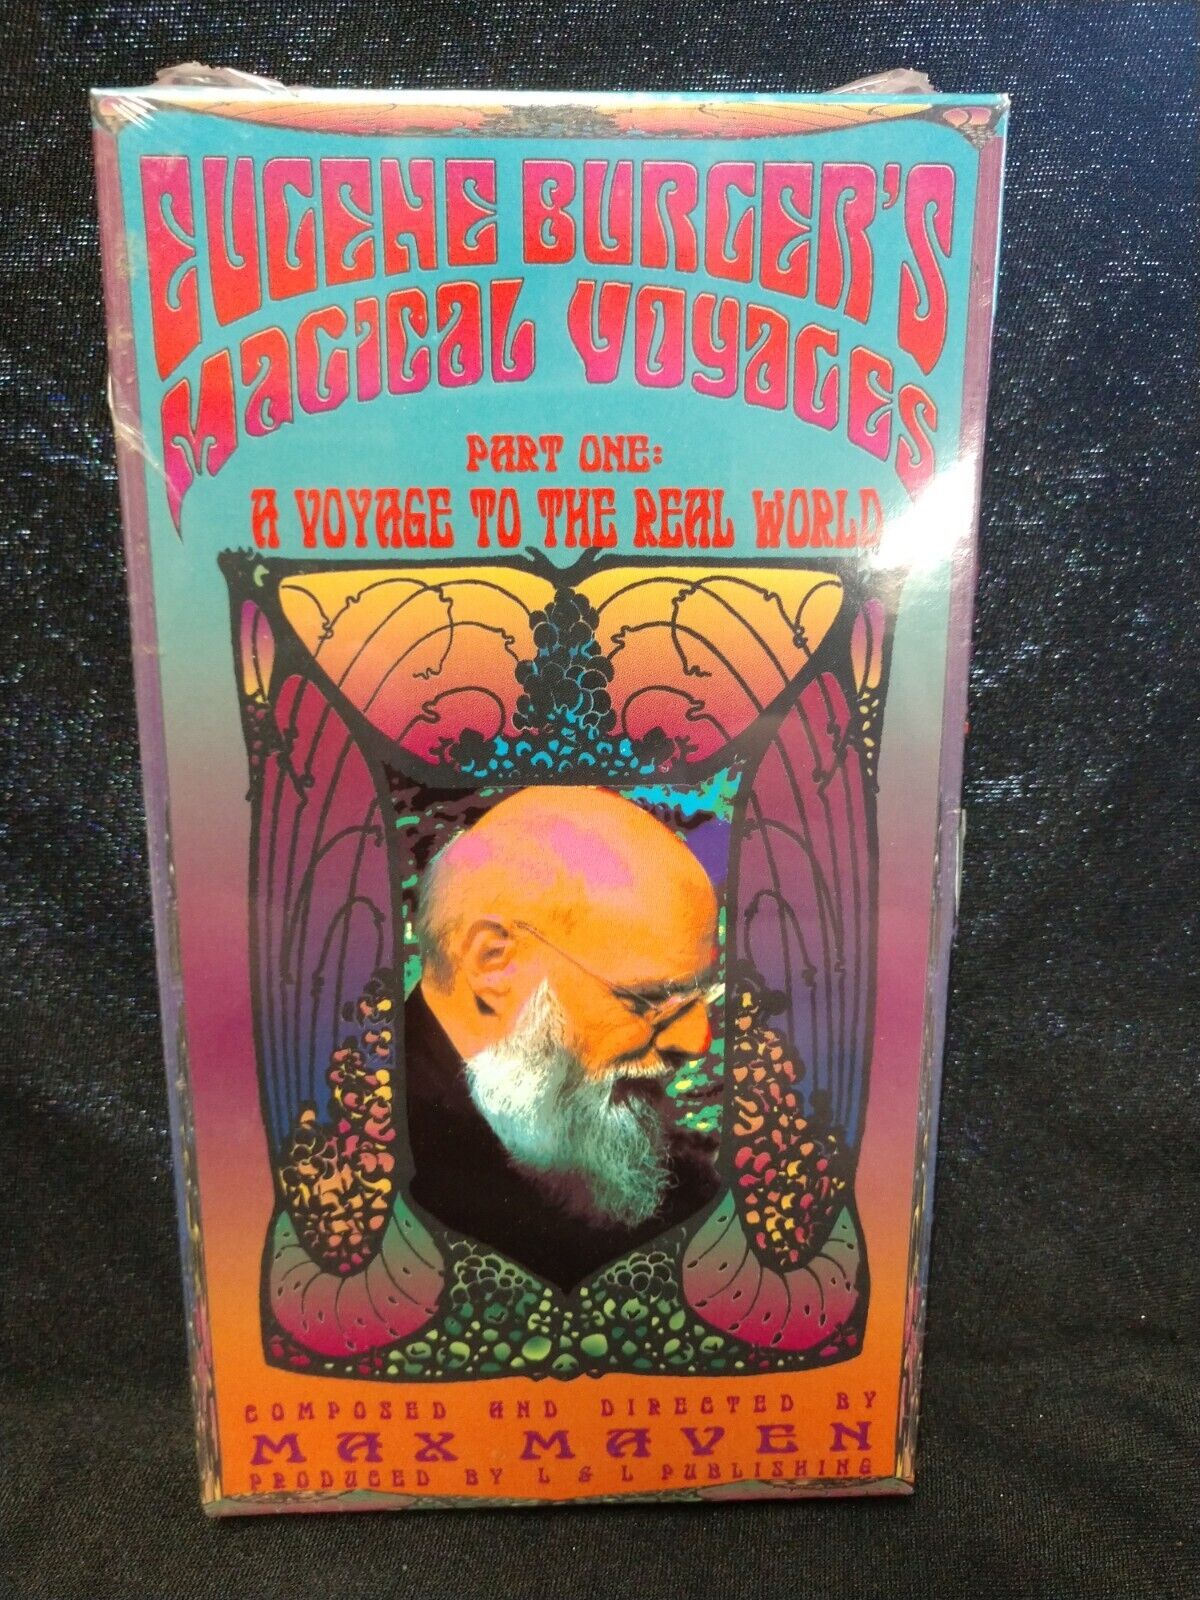 Eugene Burger\'s Magical Voyages Part One VHS Video Tape